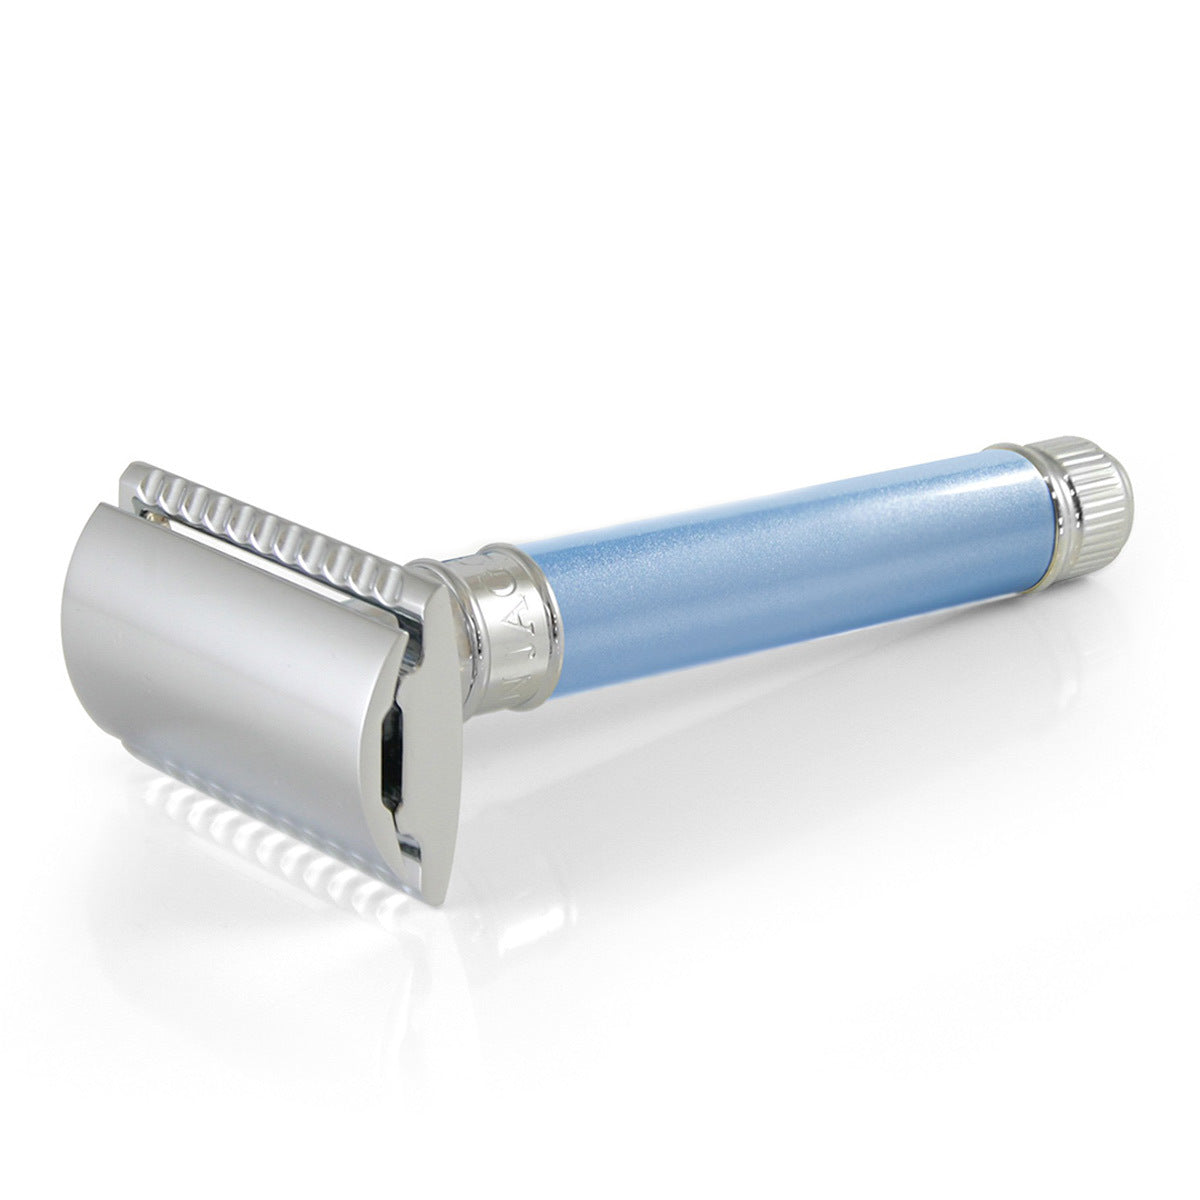 Primary image of Extra Long DE Razor - Pearl Effect Blue